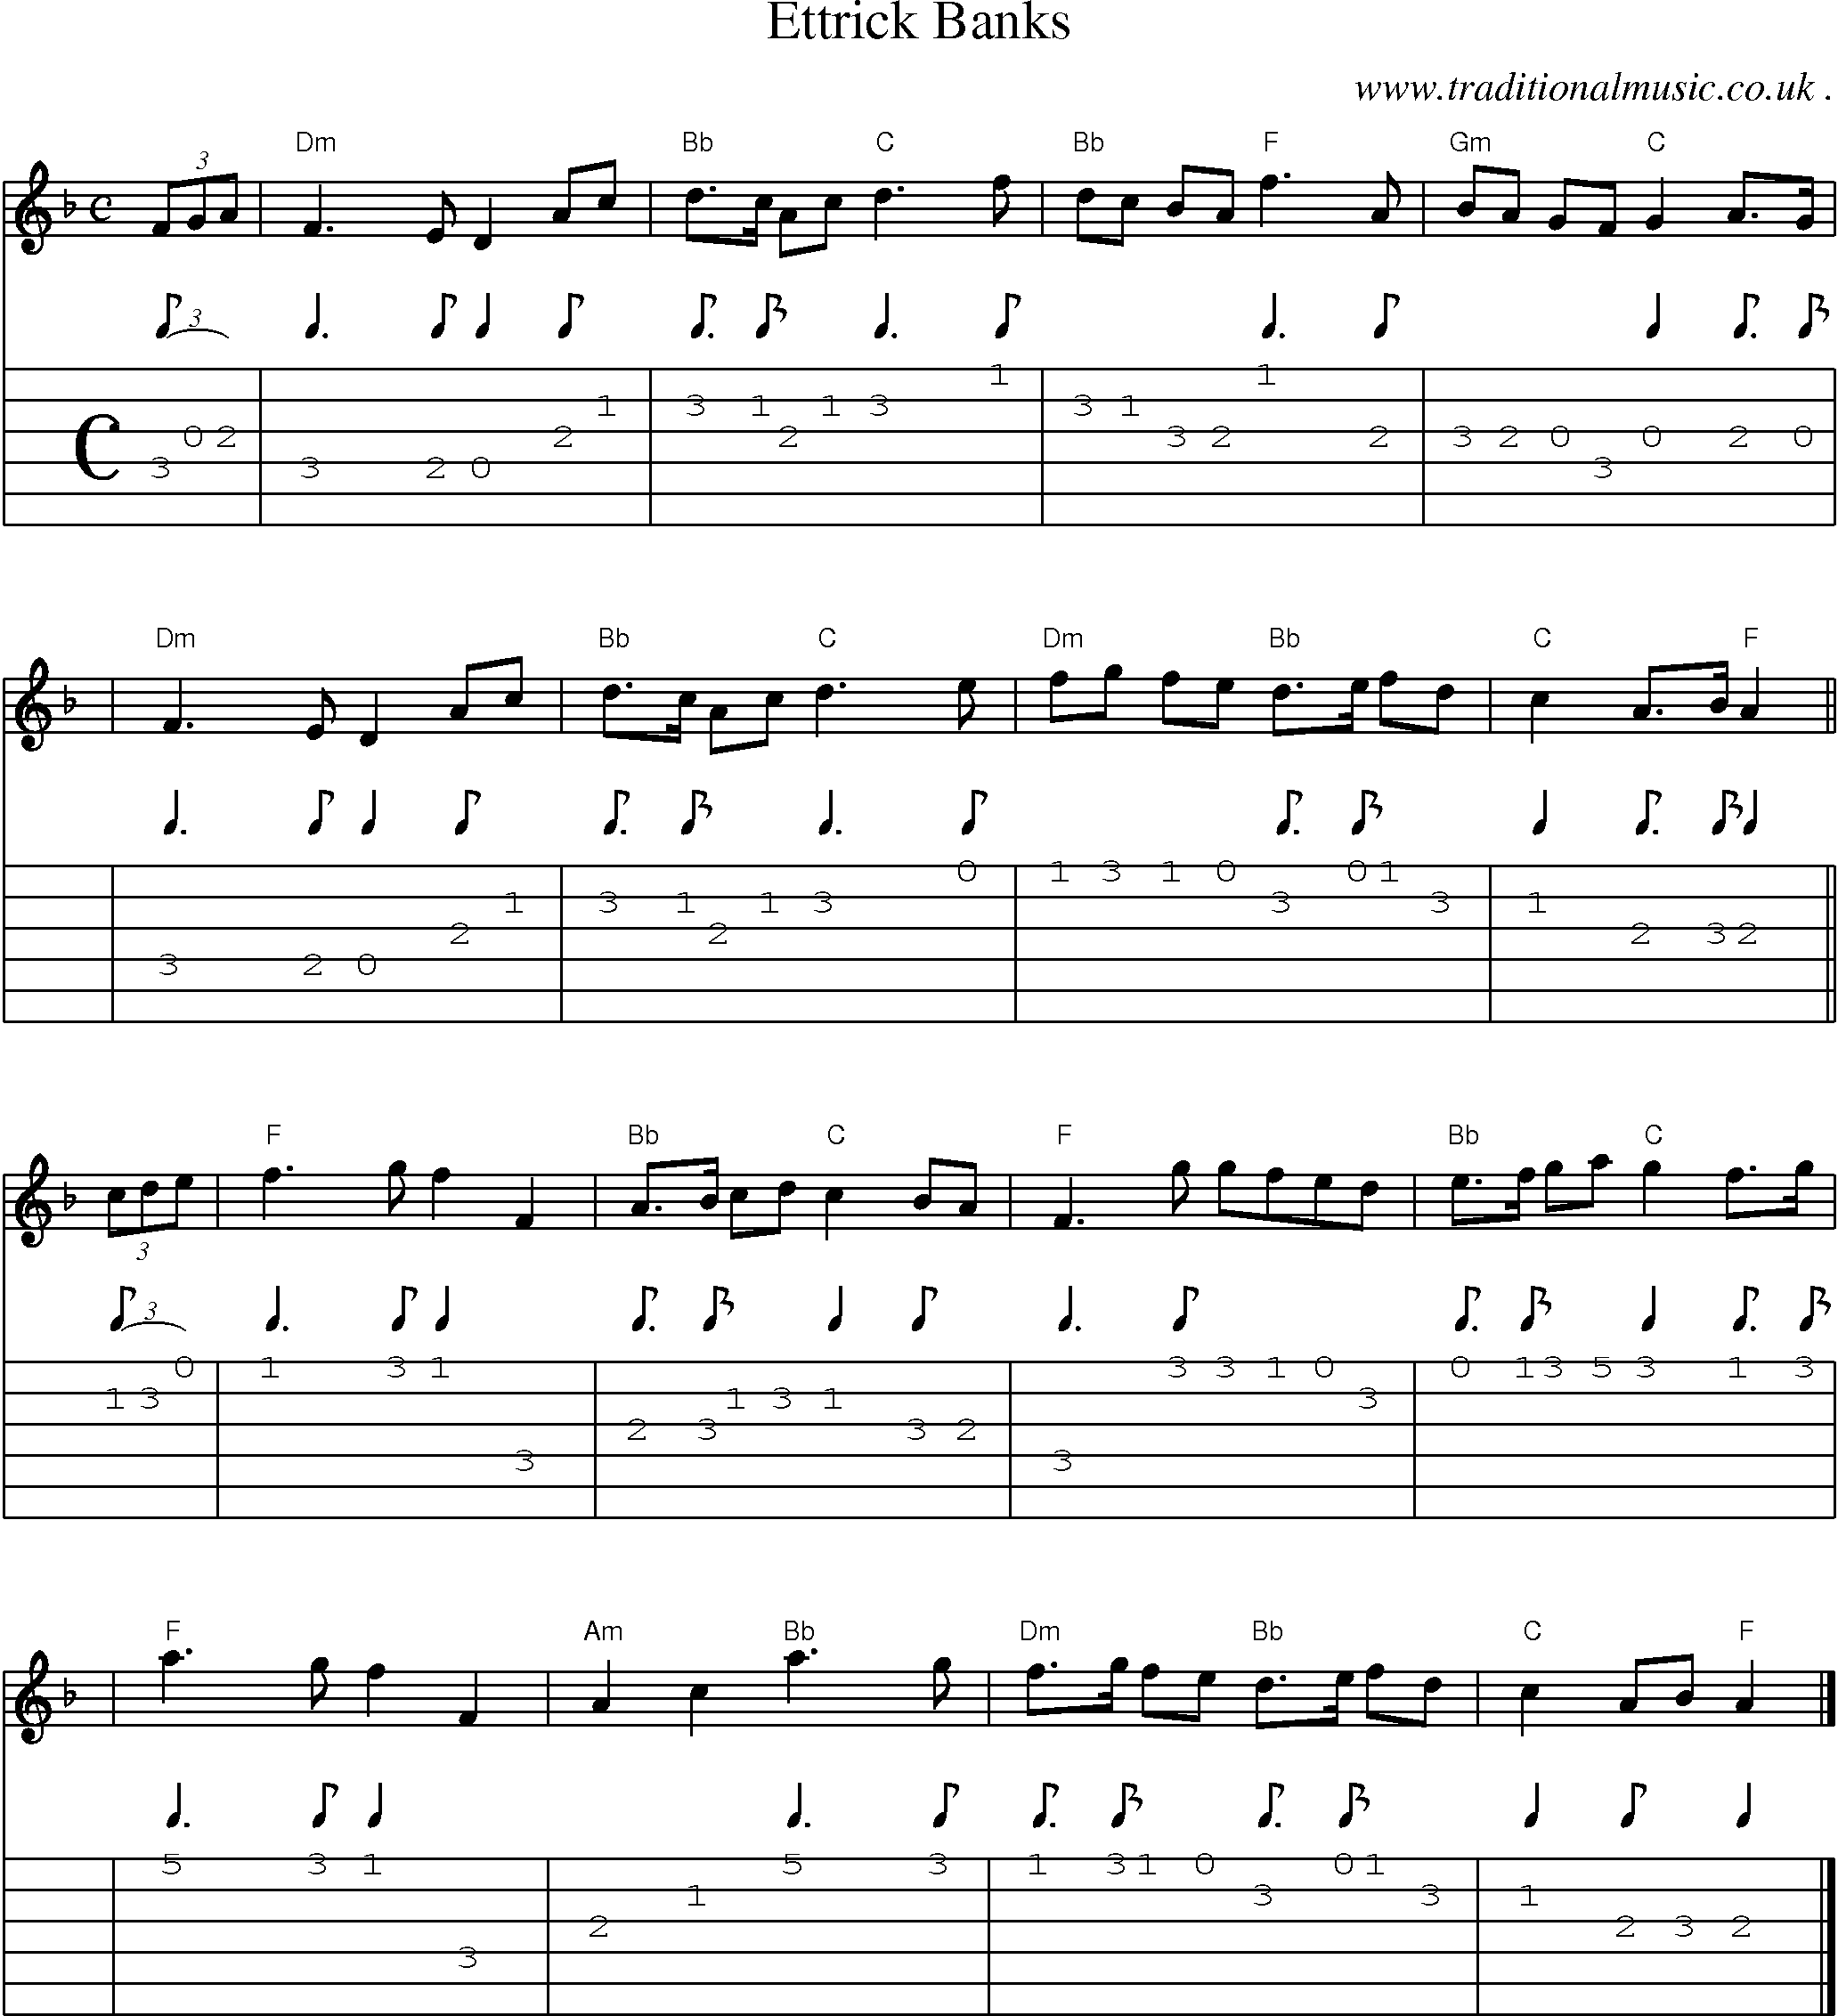 Sheet-music  score, Chords and Guitar Tabs for Ettrick Banks